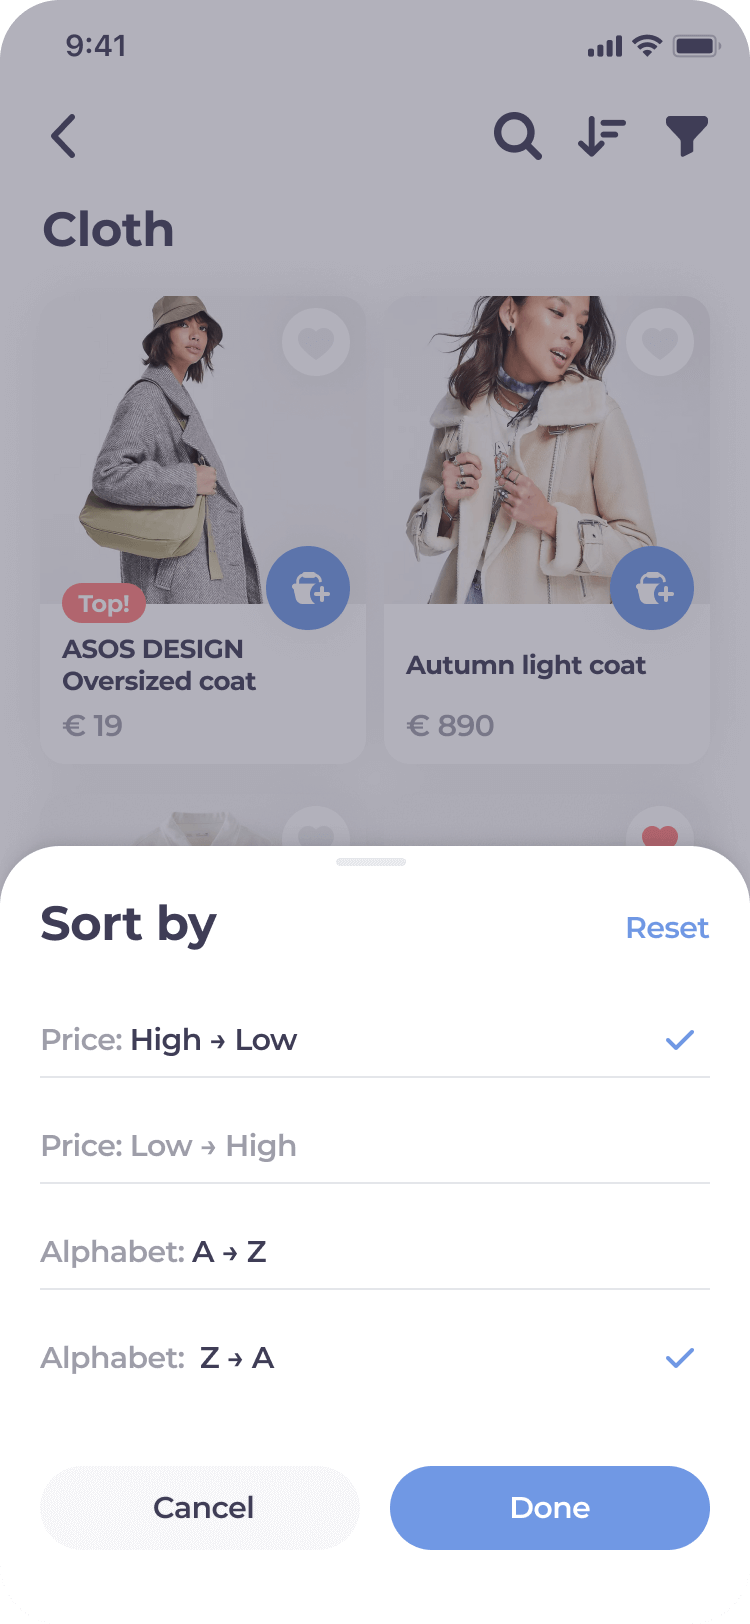 Sorting products/services in product lists